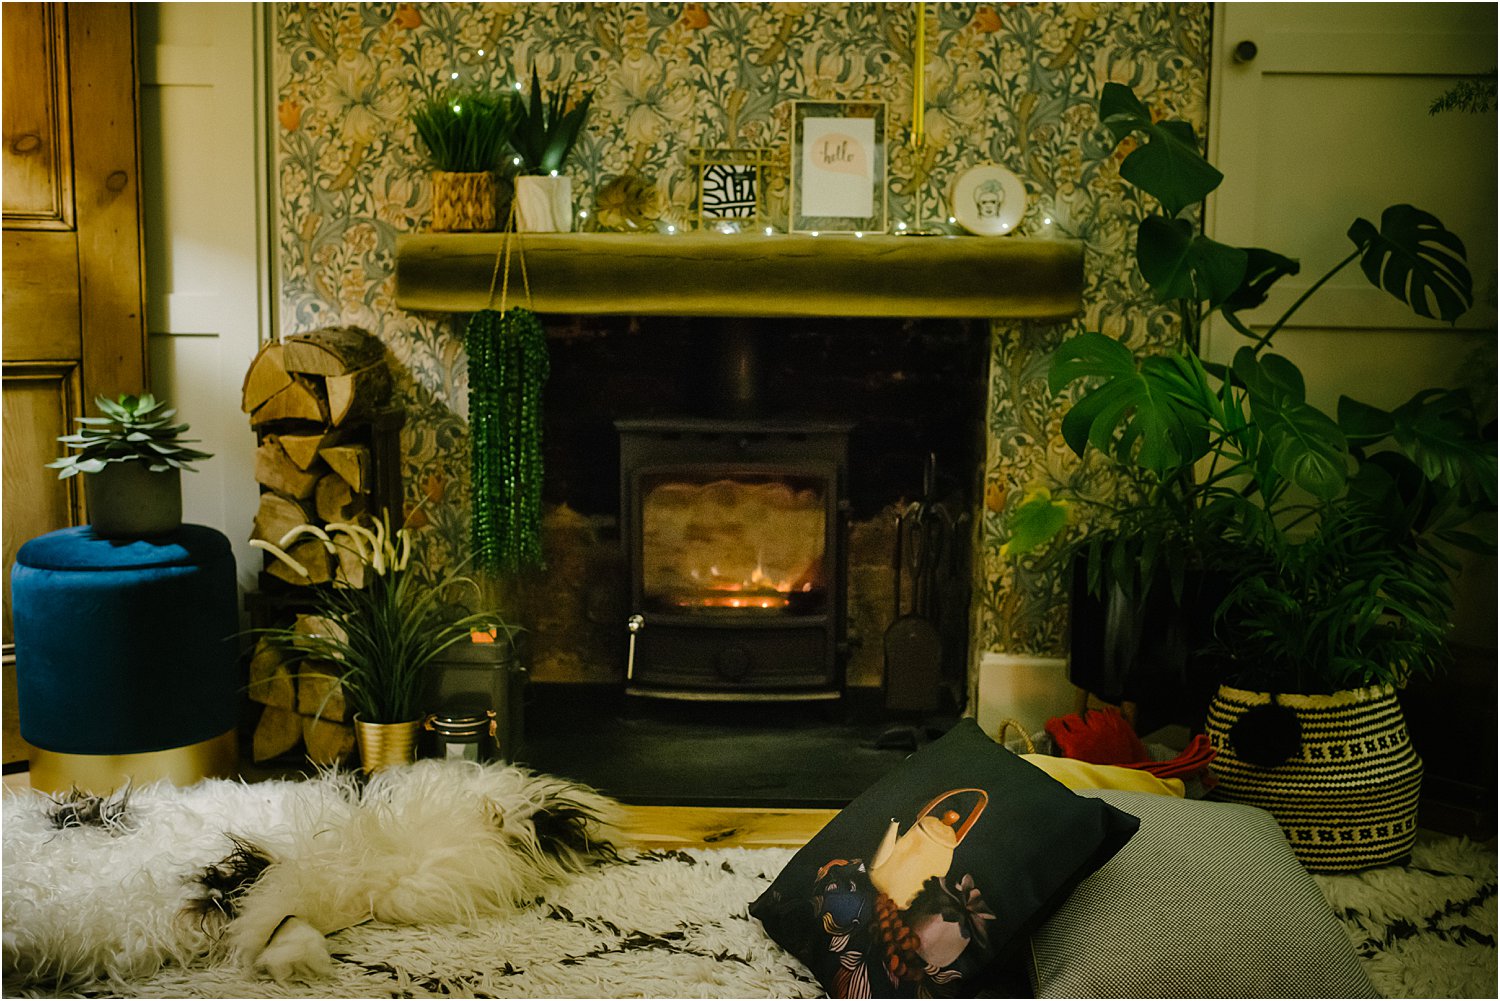 how-a-stove-burner-changed-lifestyle-cosy-maximalist-eclectic-interiors-lily-sawyer-photo